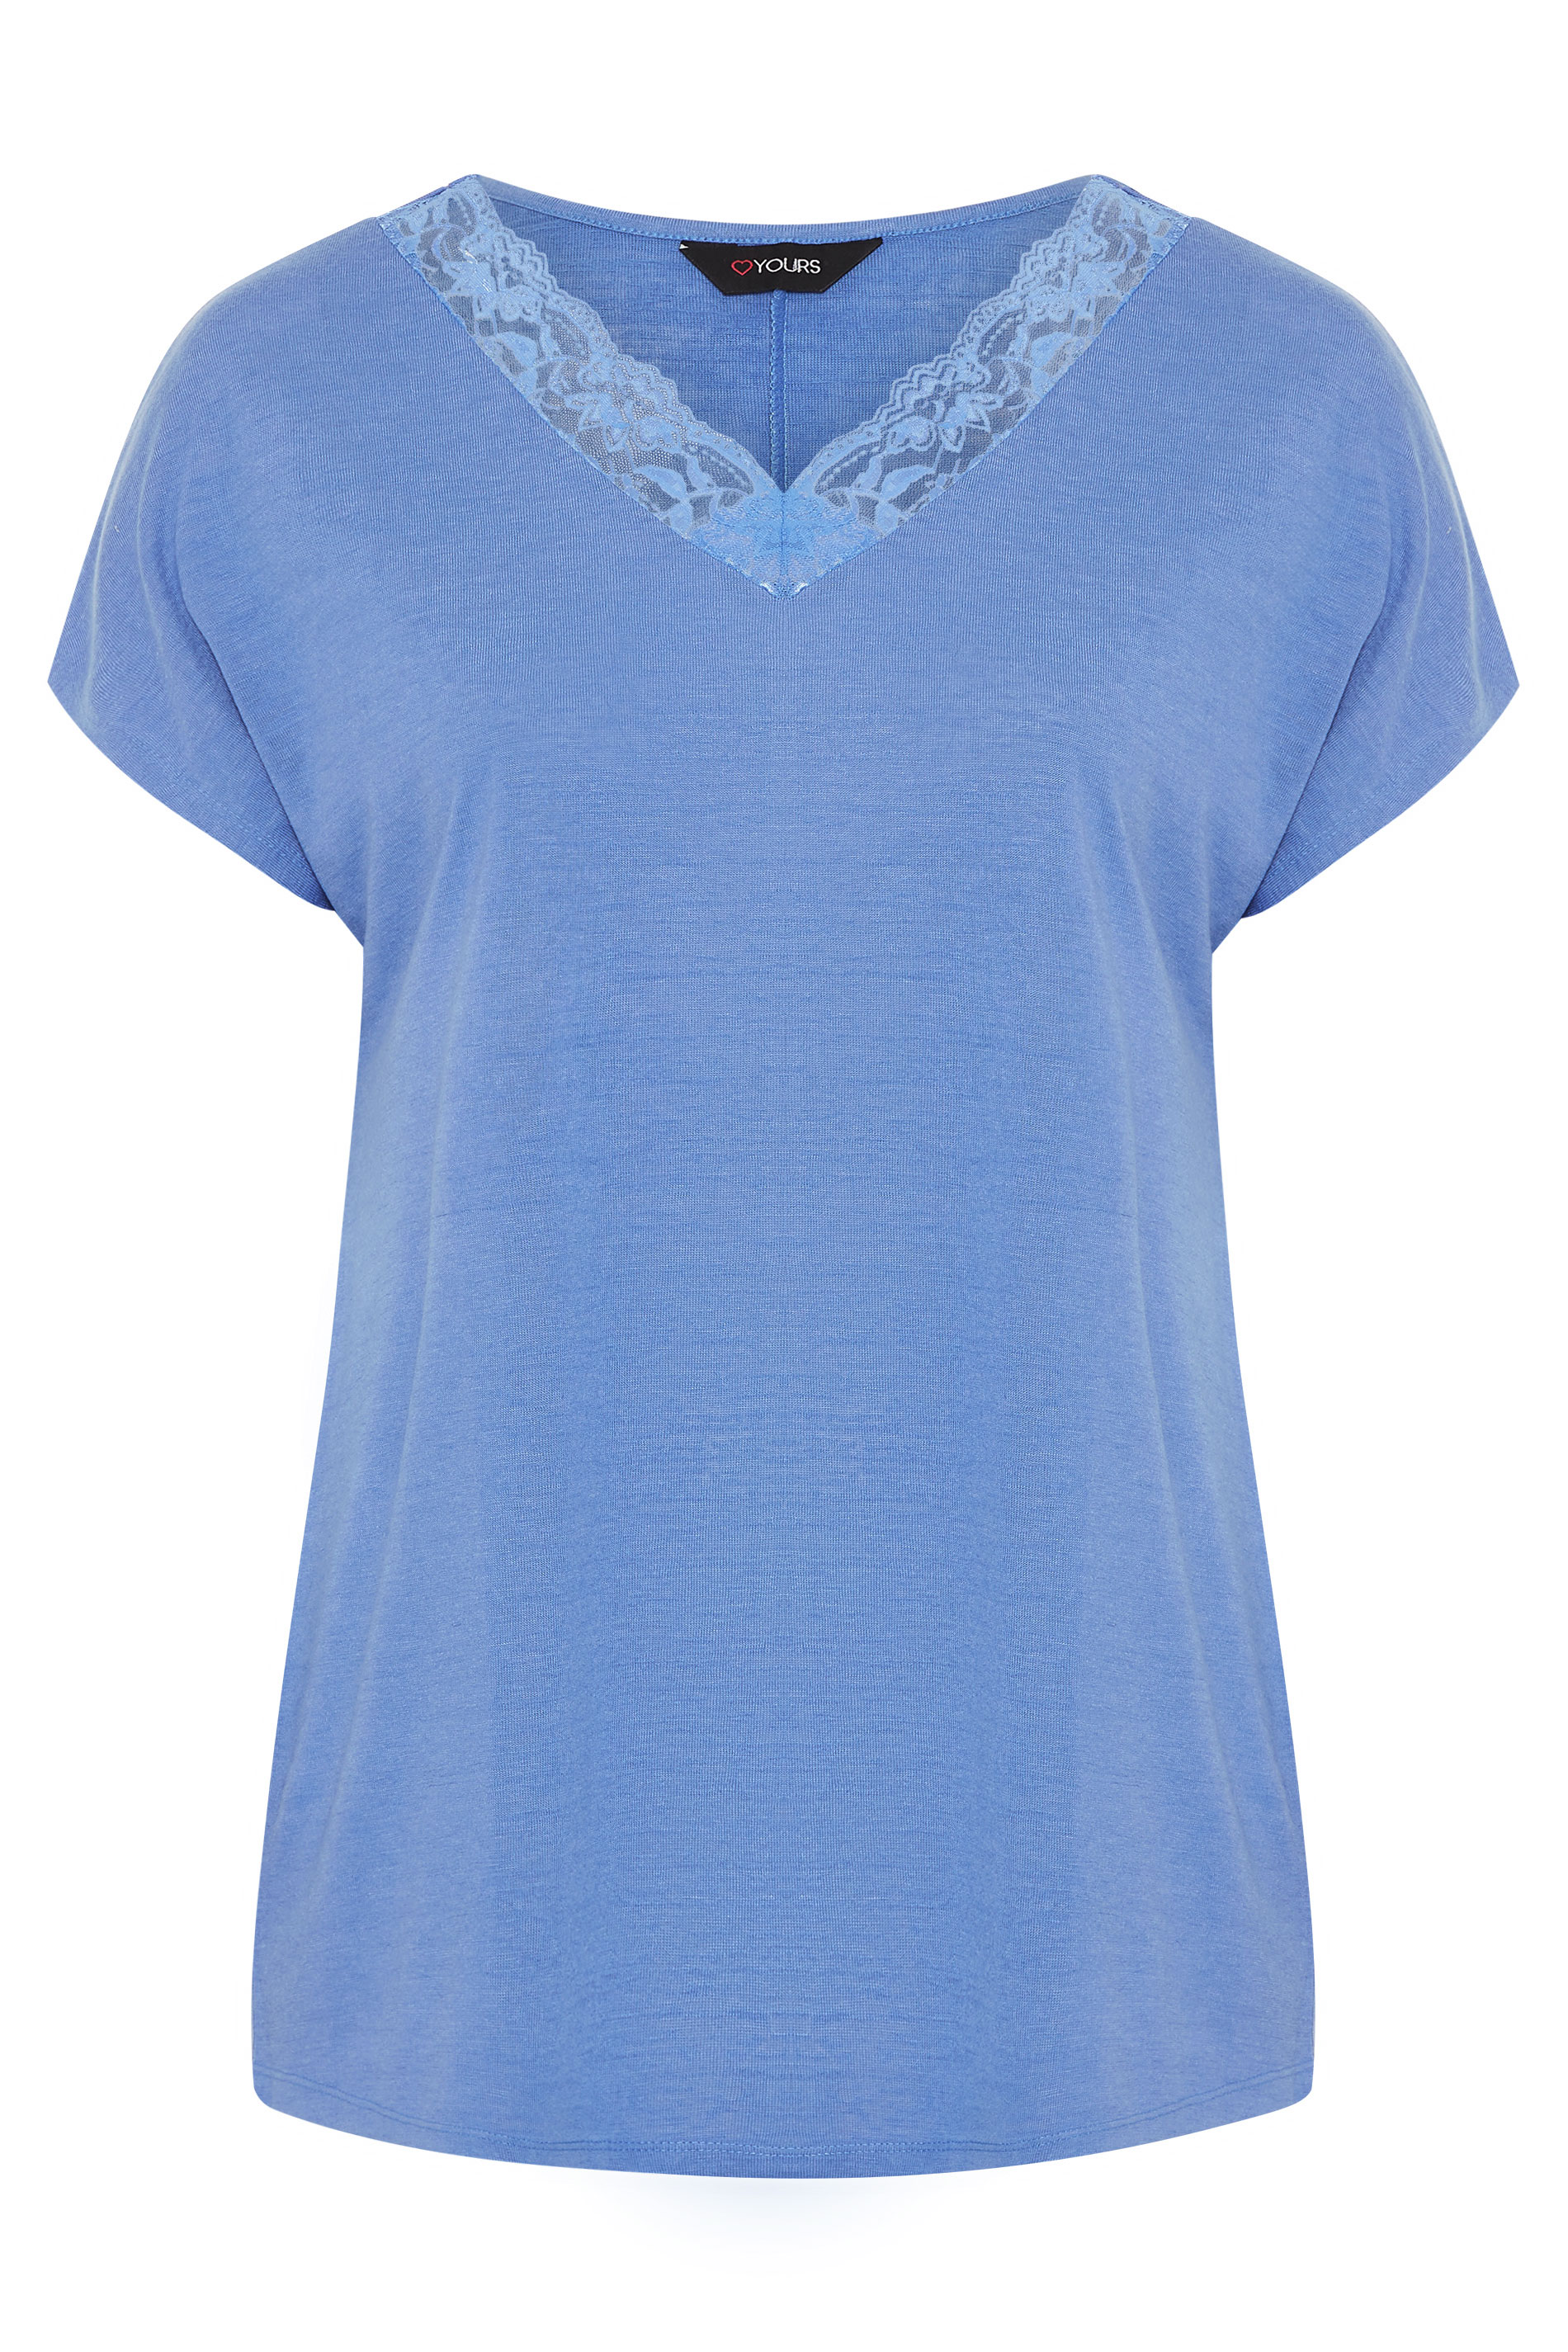 Blue Lace Neck T-Shirt | Yours Clothing